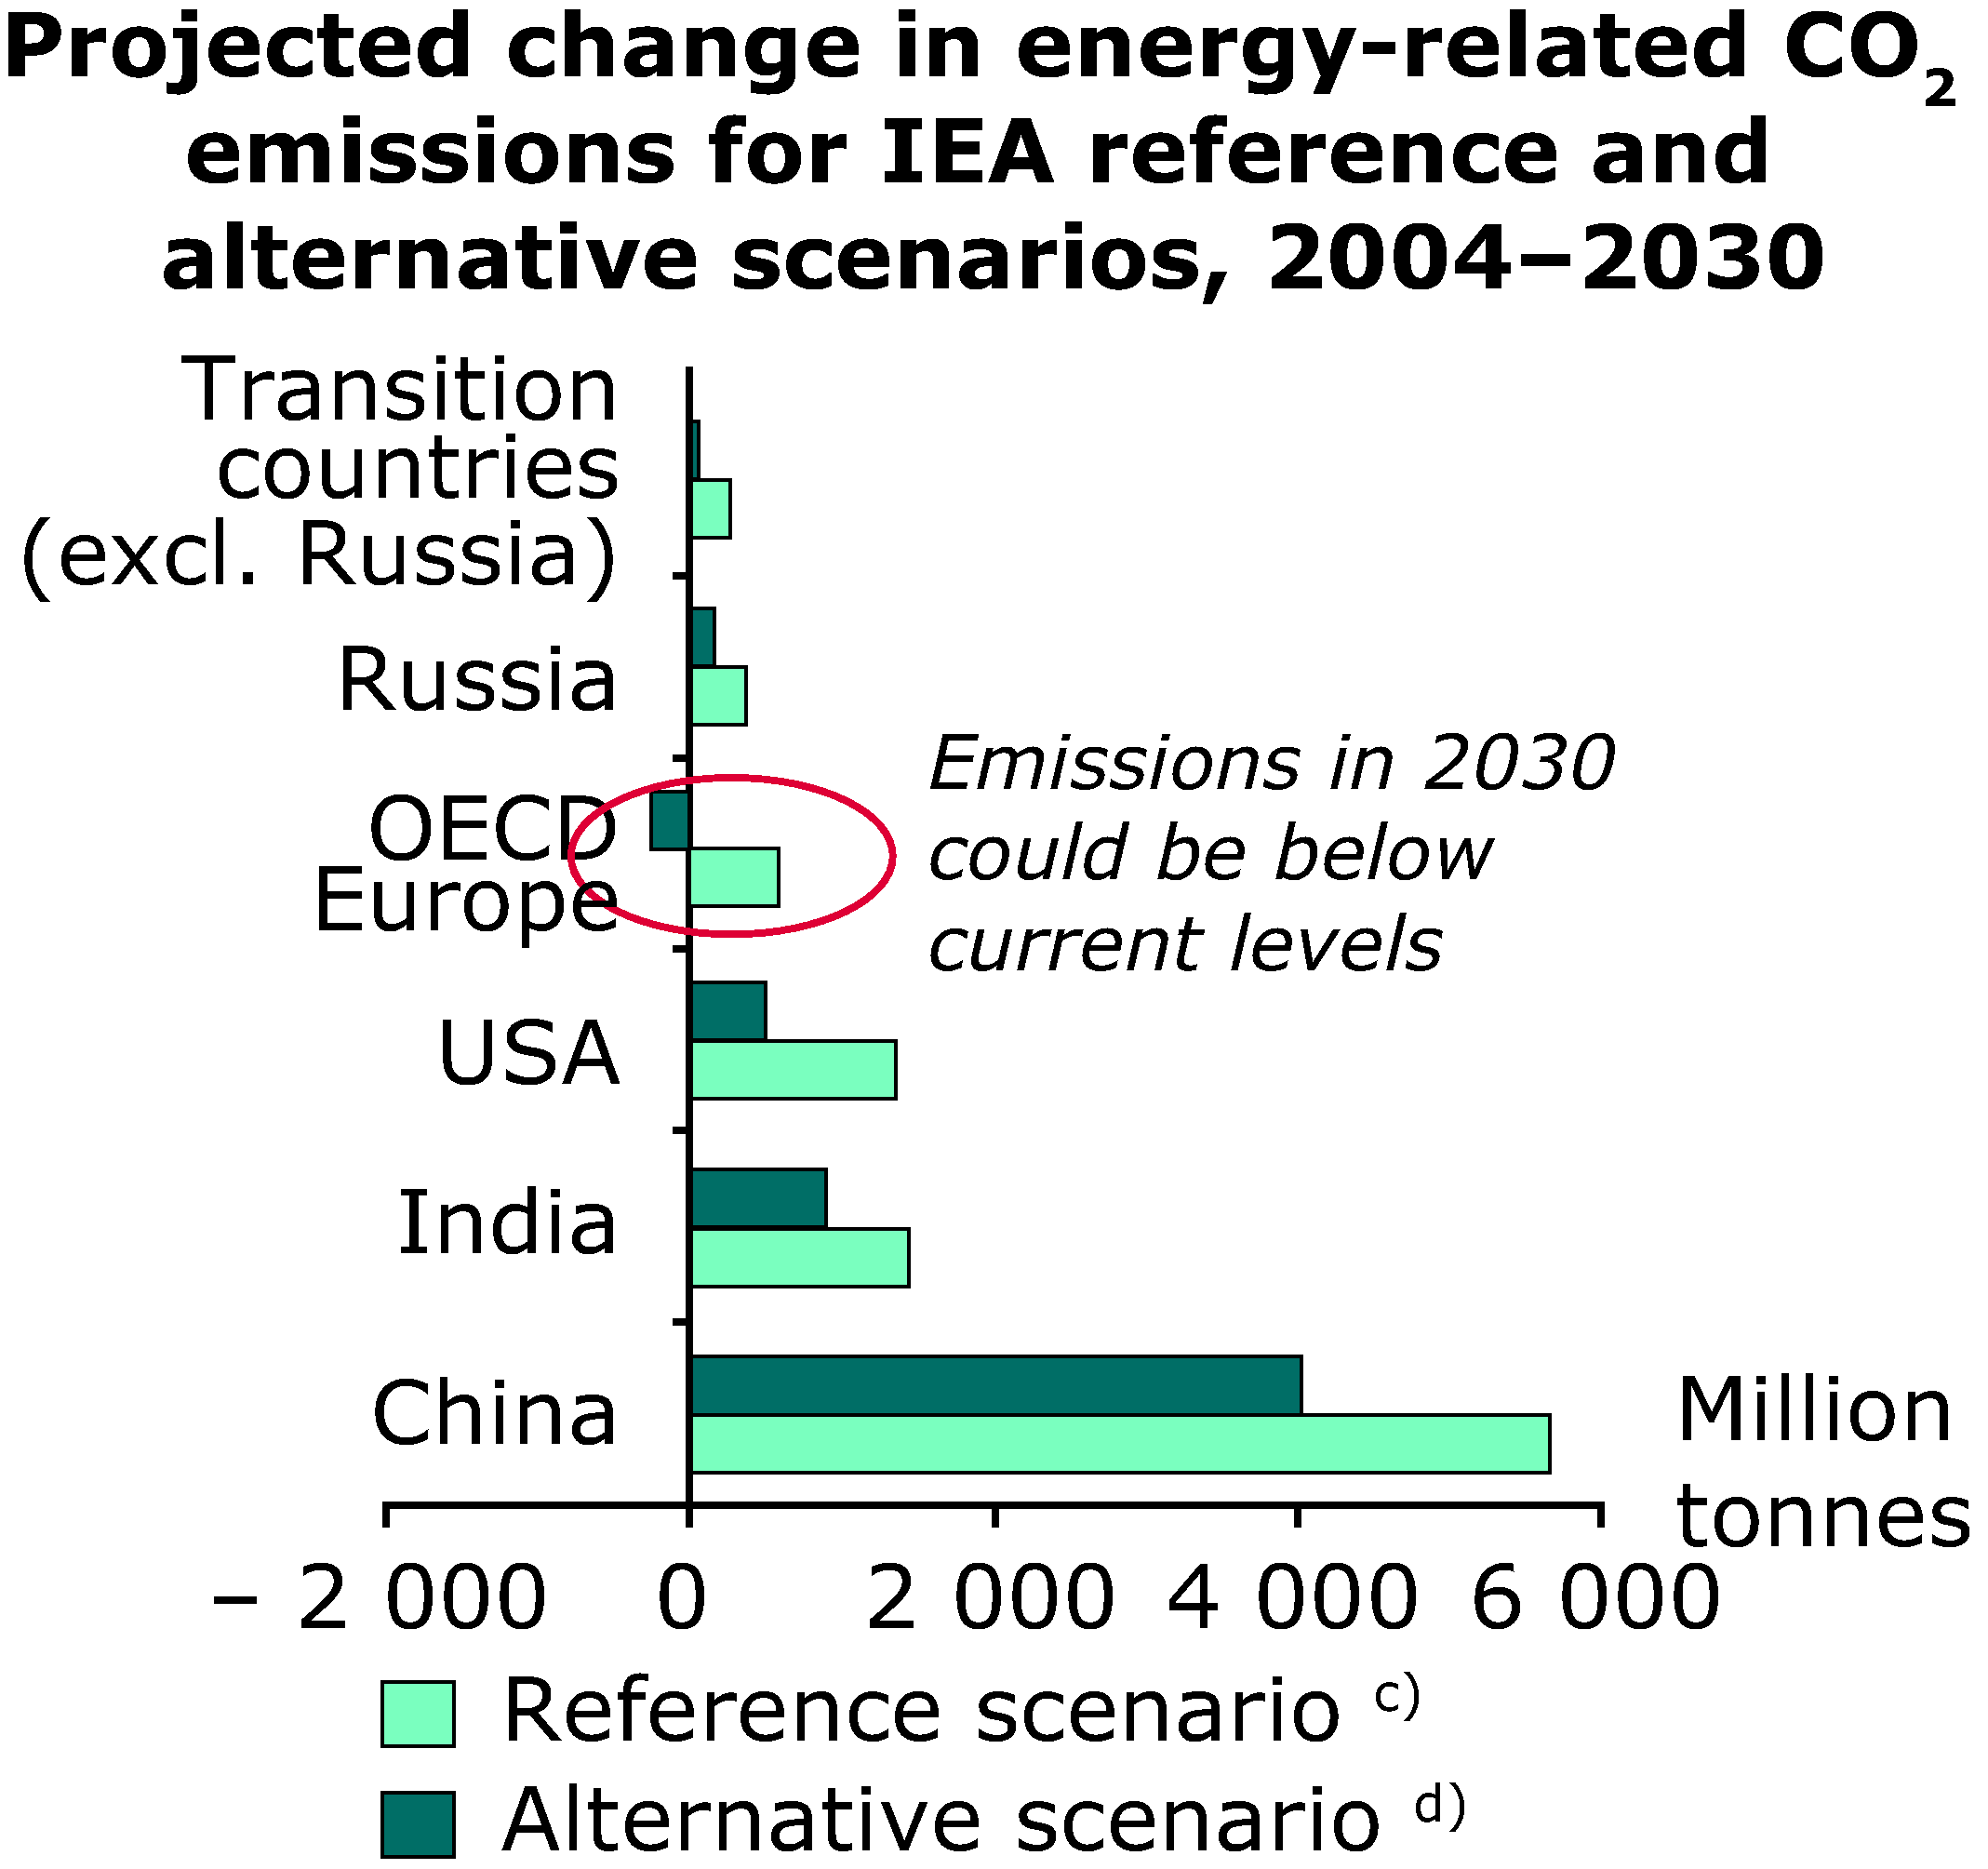 Projected change in energy-related CO2 emissions for IEA reference and alternative scenarios, 2004-2030